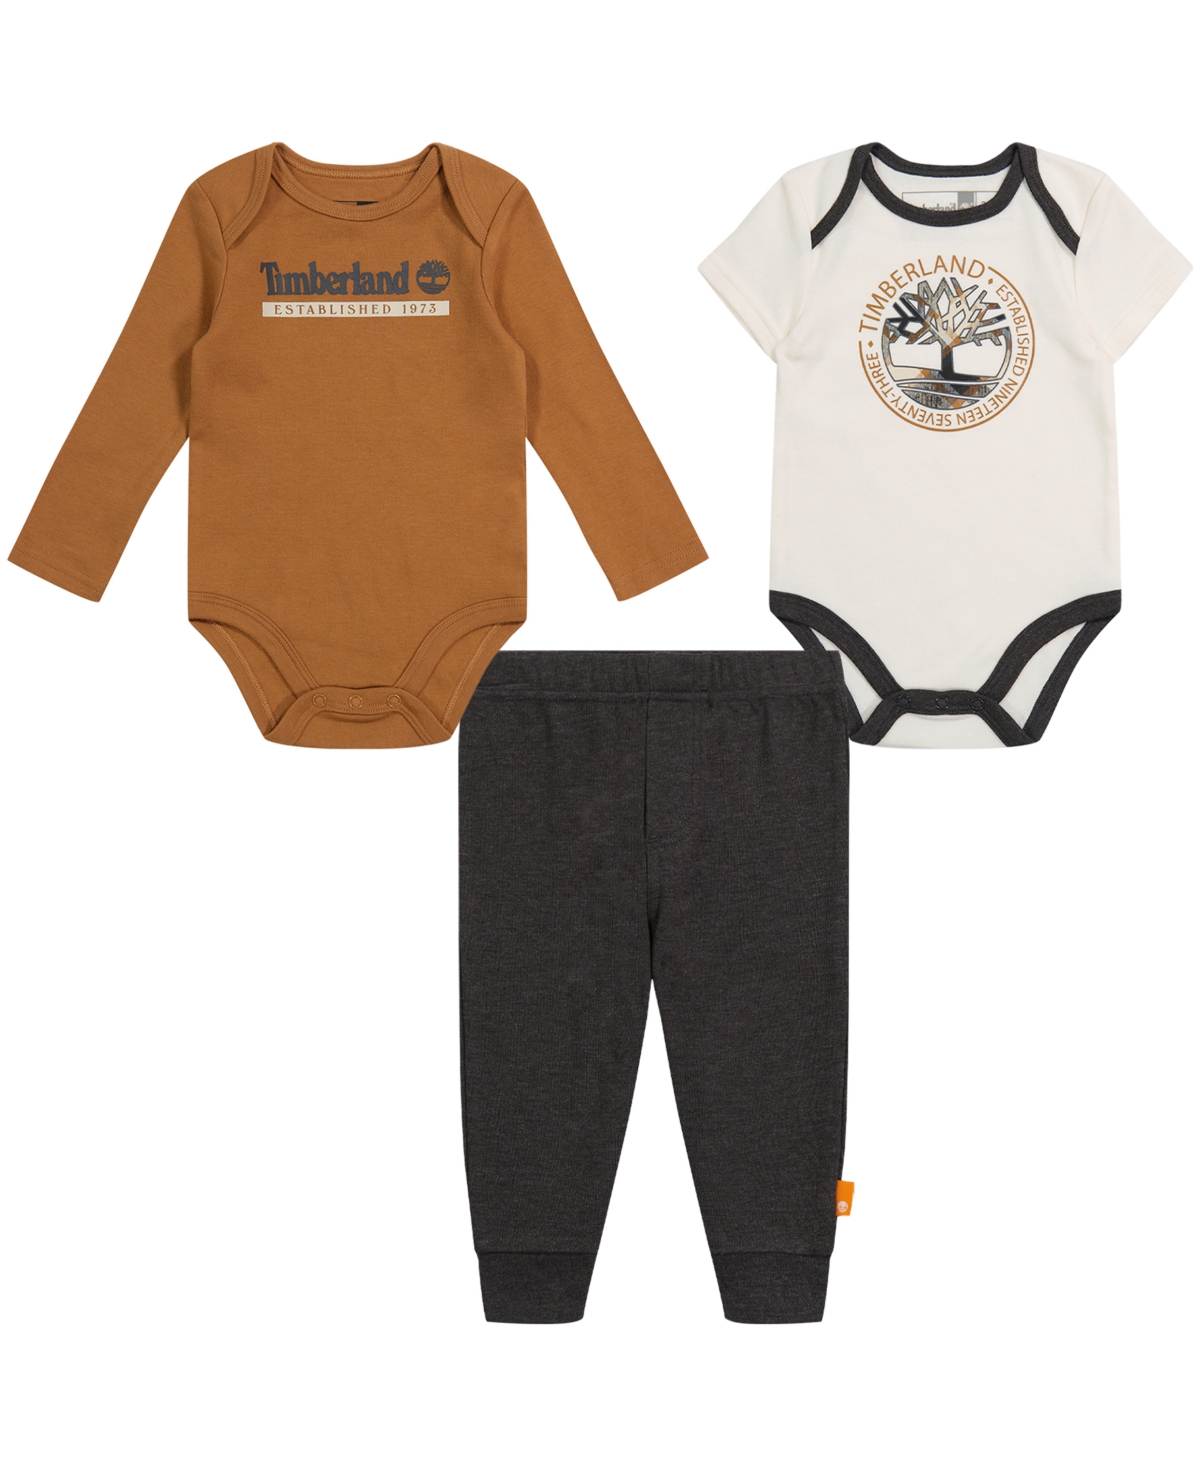 Timberland Baby Boys Logo Long Sleeve And Short Sleeve Bodysuits And Heather Joggers, 3 Piece Set In Brown Sugar